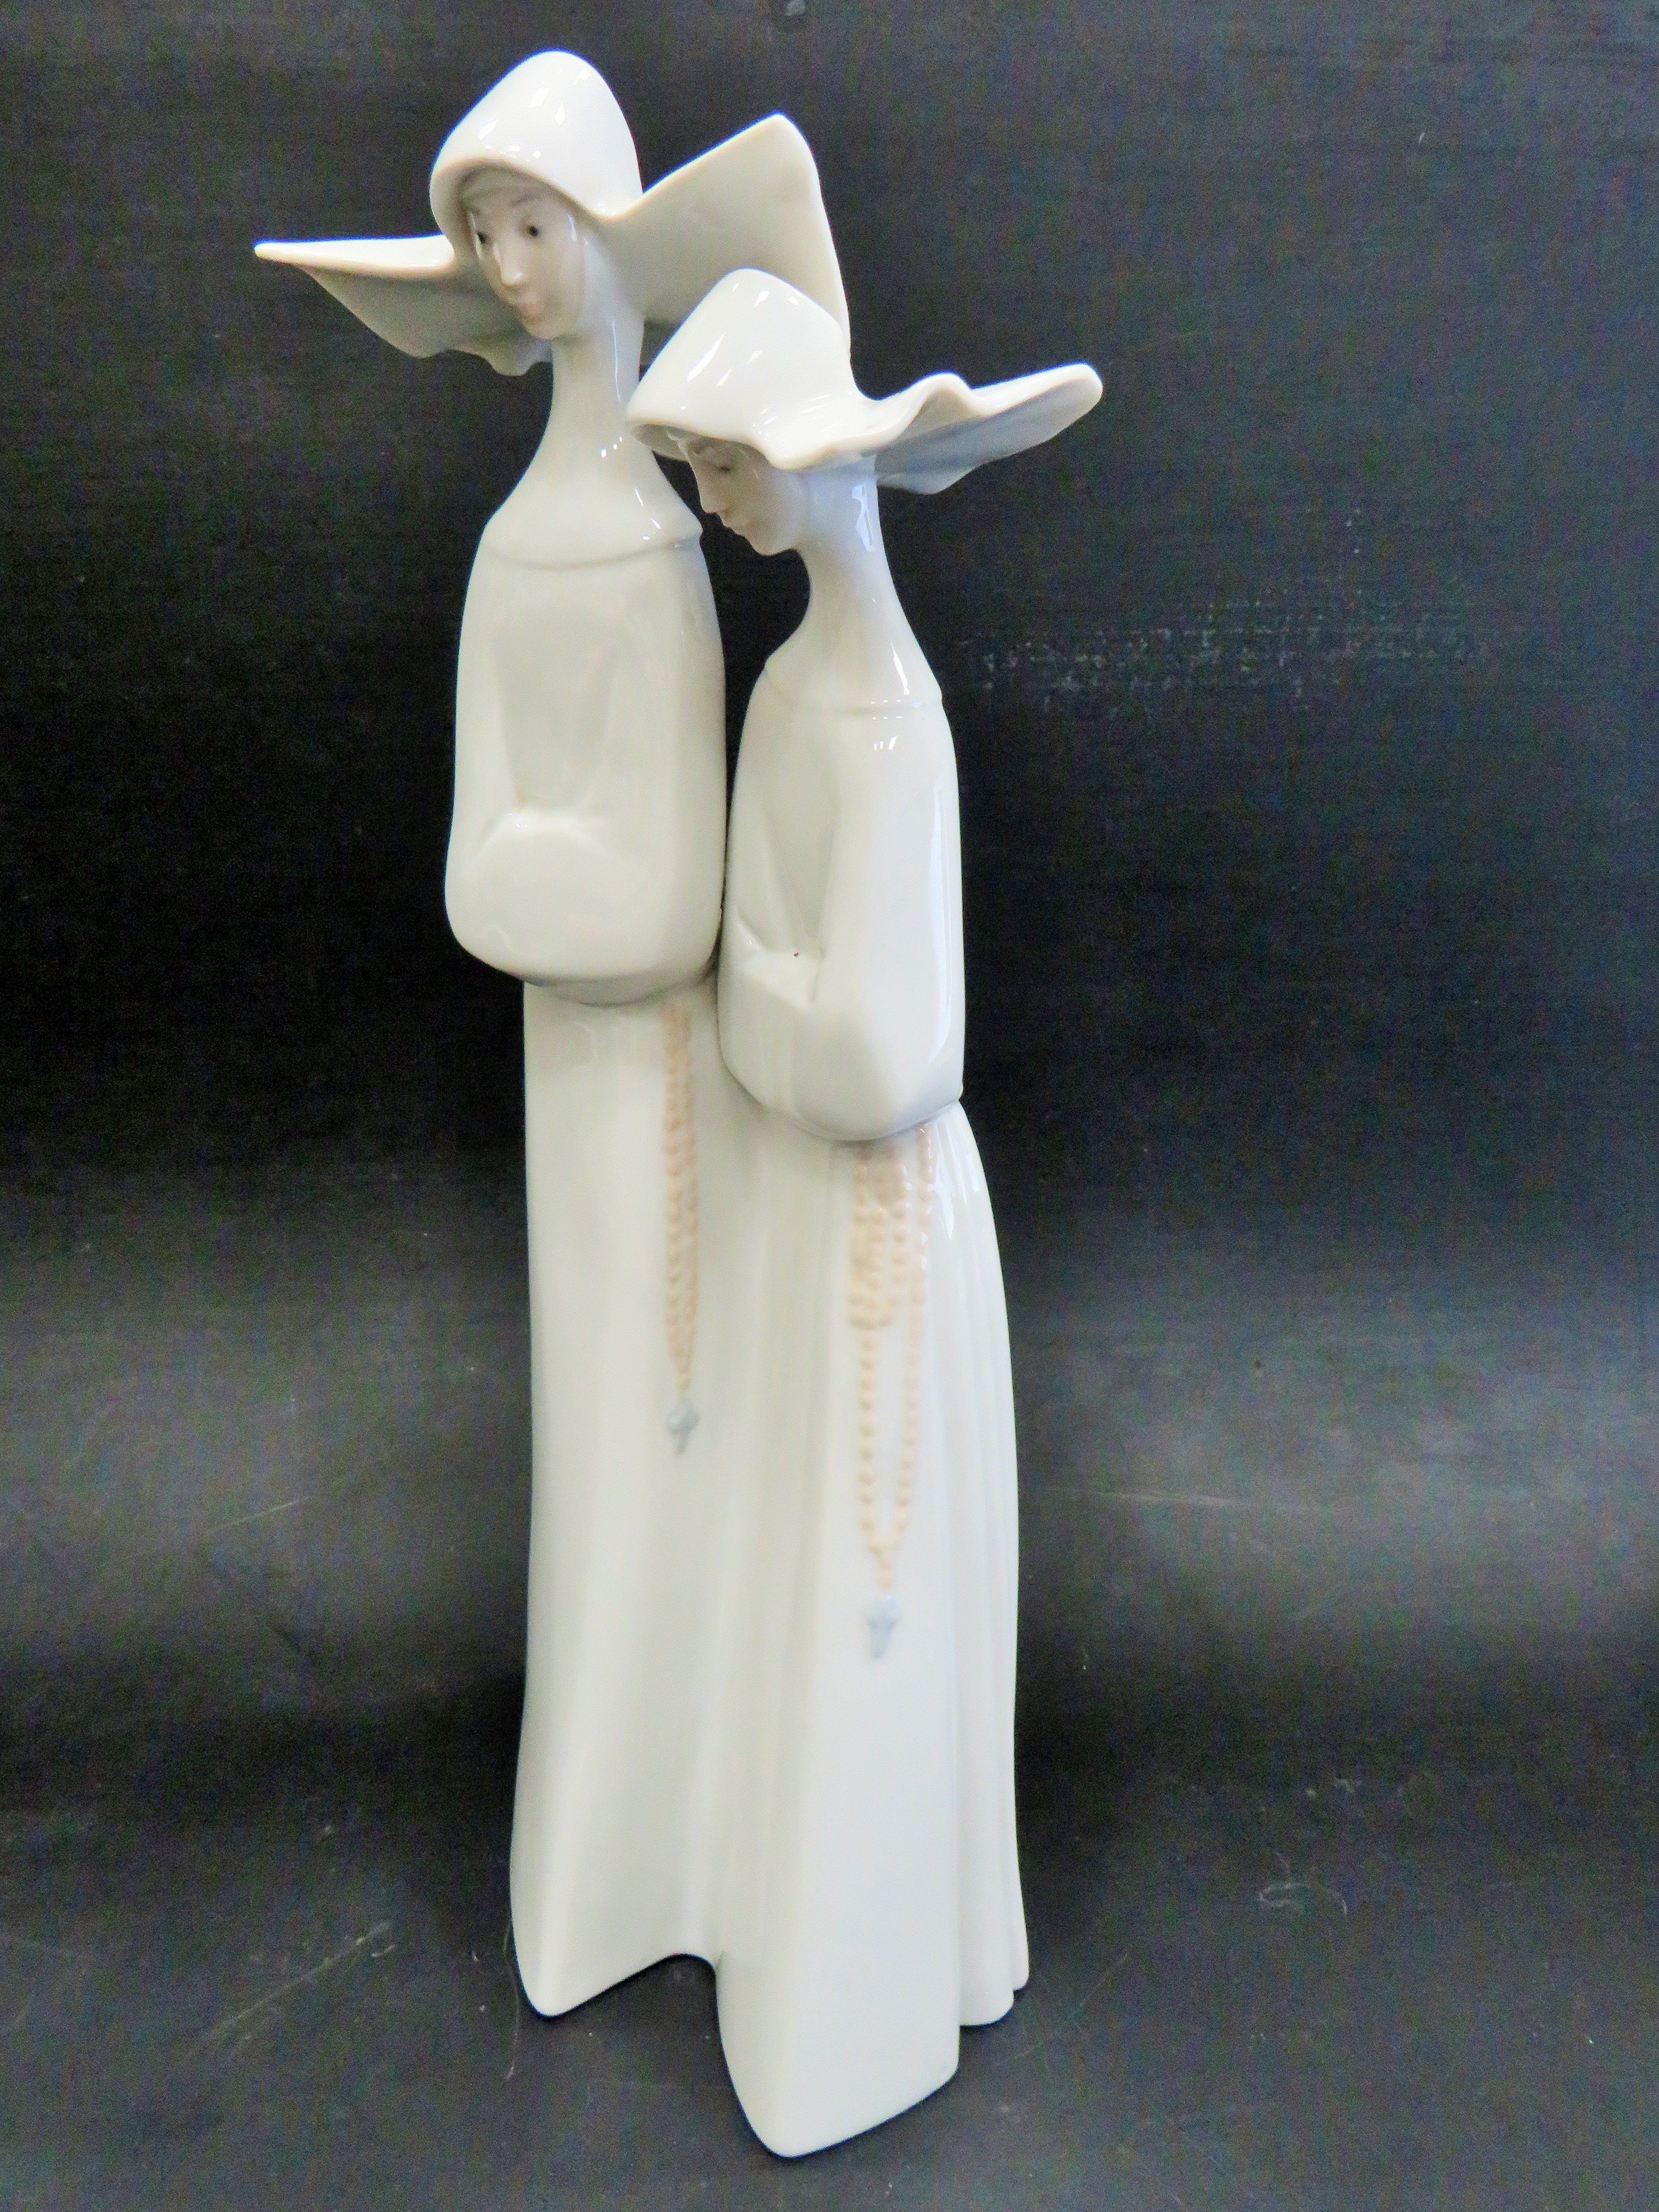 Lladro Figurine 'Two Nuns' 4611 in excellent condition. Measures approx 12 inches tall. See photos - Image 4 of 6